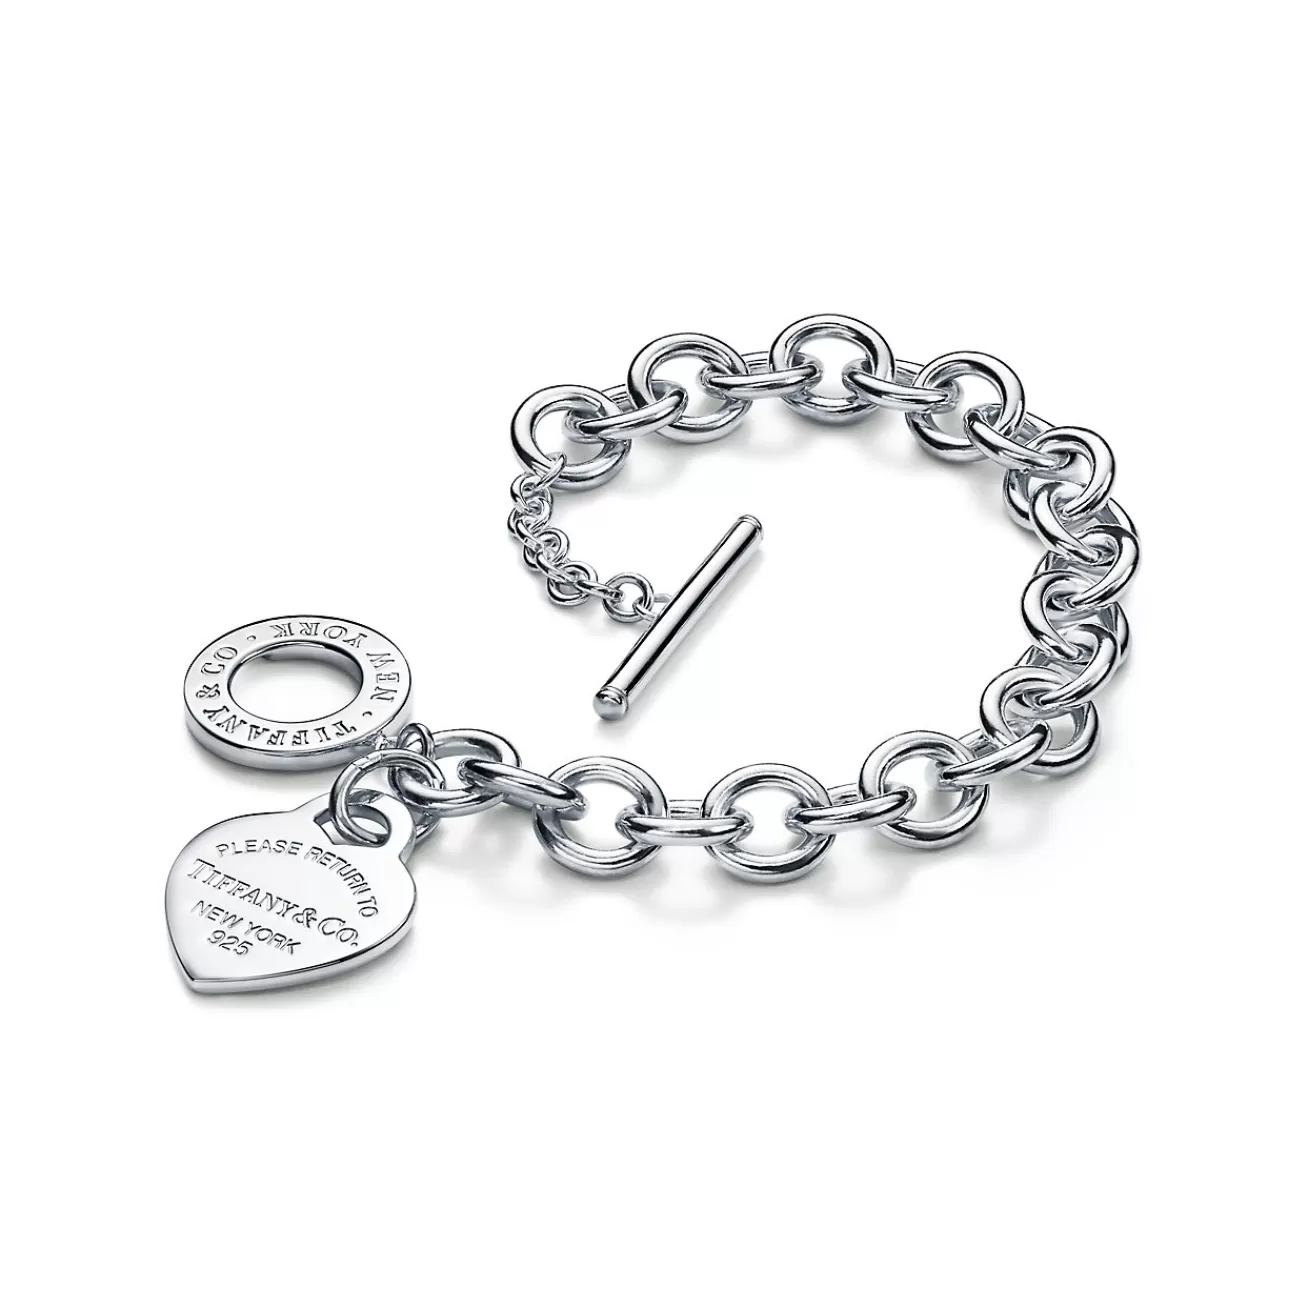 Tiffany & Co. Return to Tiffany™ Medium heart tag in sterling silver on a toggle bracelet 8" long. | ^ Bracelets | Gifts for Her